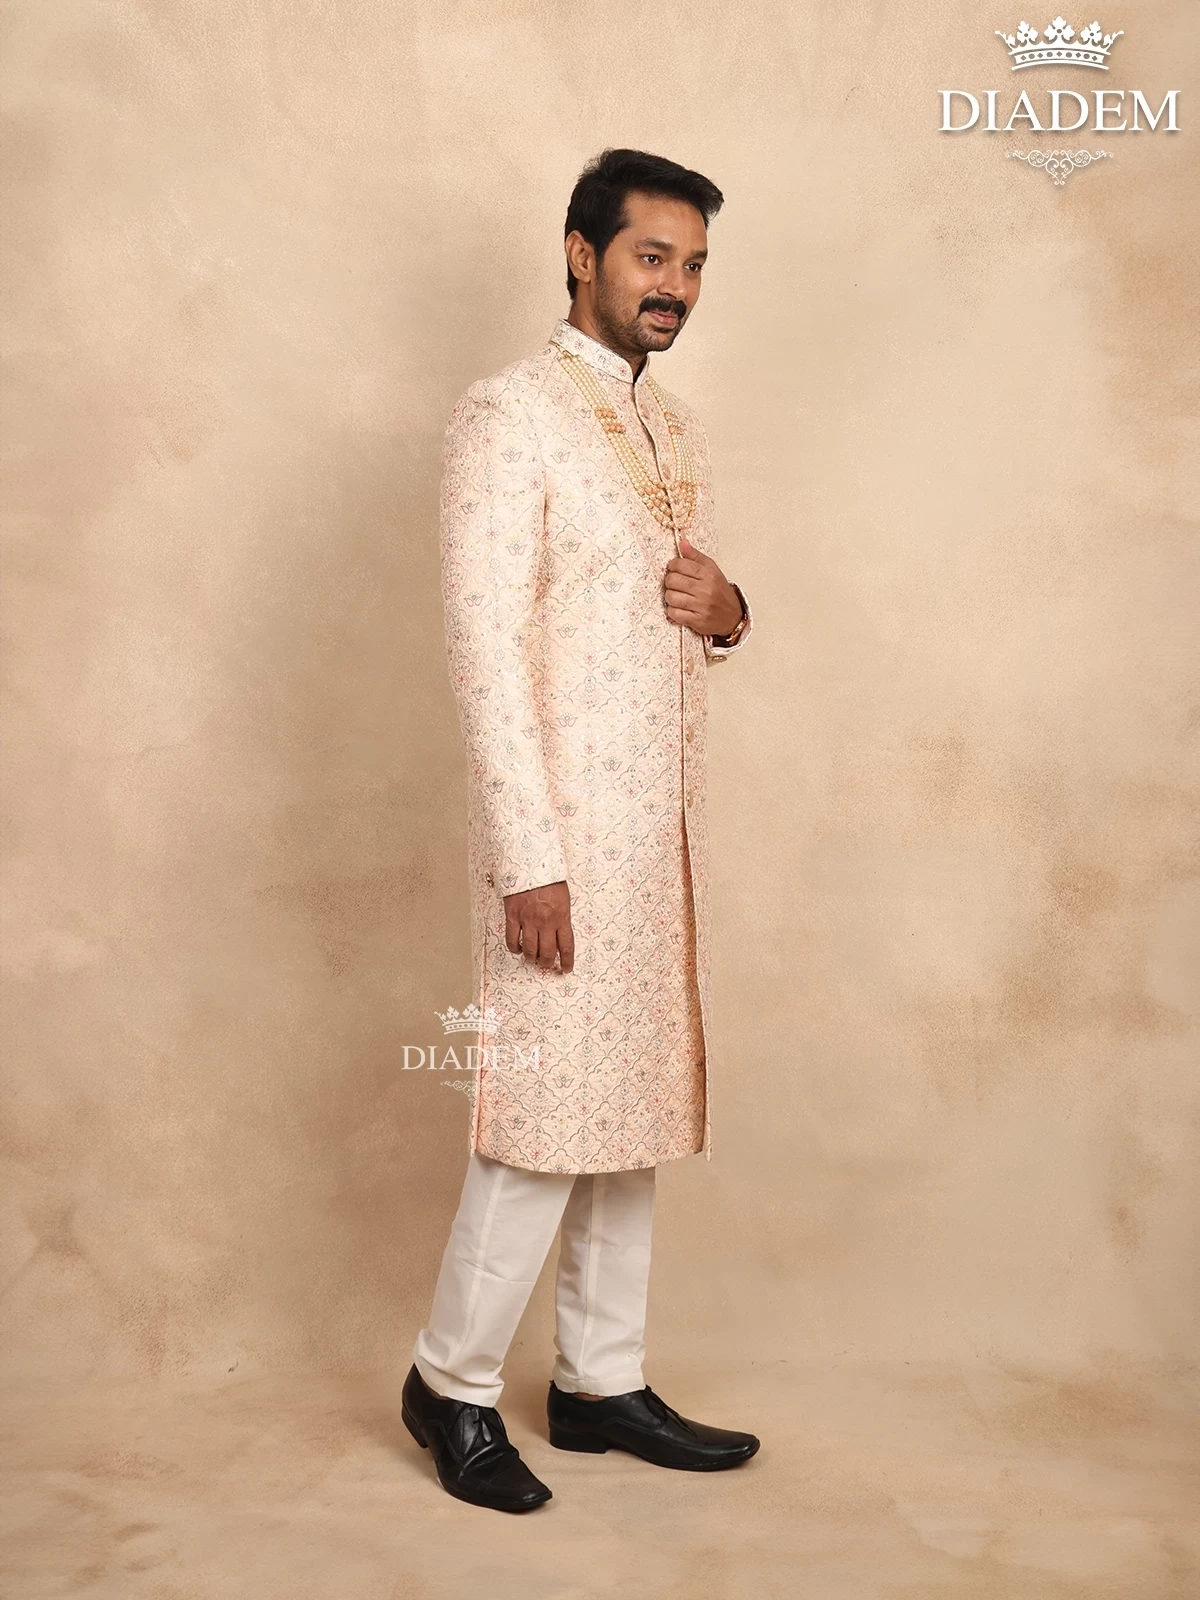 Cream Raw Silk Sherwani Suit With Floral Threadwork Embroidery, Paired With Bead Mala